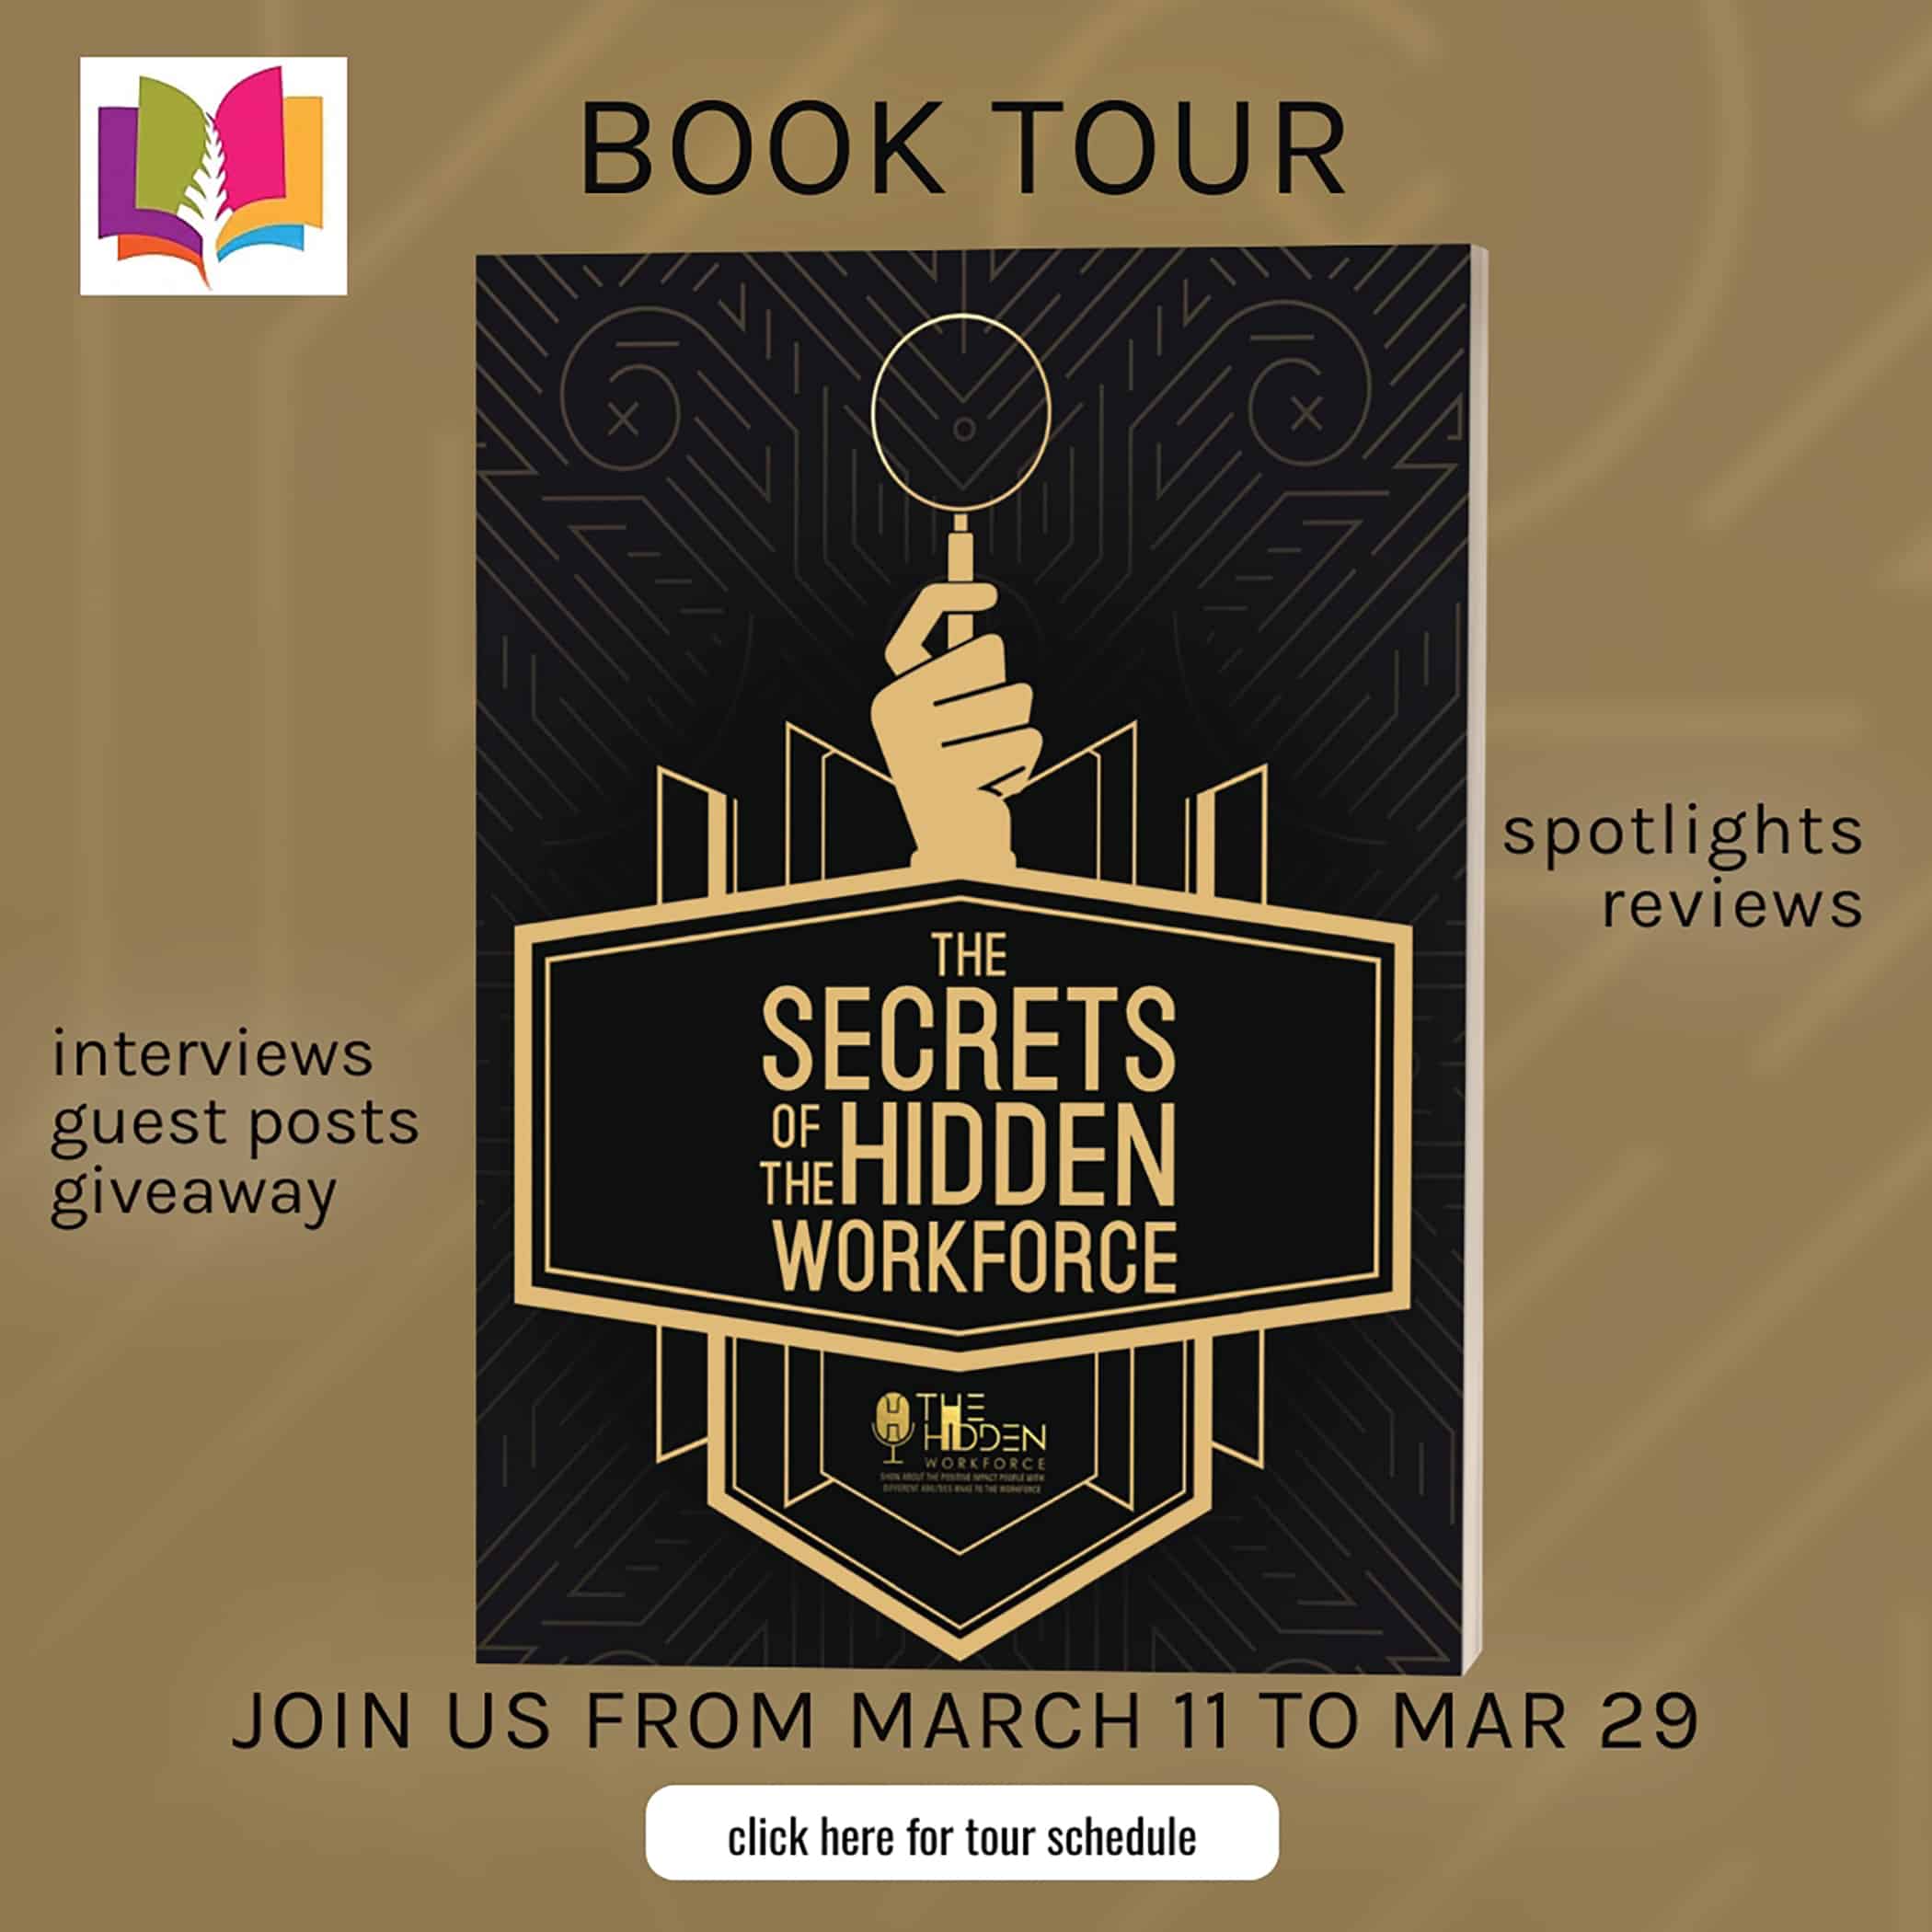 The Secrets of the Hidden Workforce by Lisa Toth | Book Review - Author Guest Post - 1 Winner of Signed Book | #NonFiction #Occupational @iReadBookTours @risestaffing